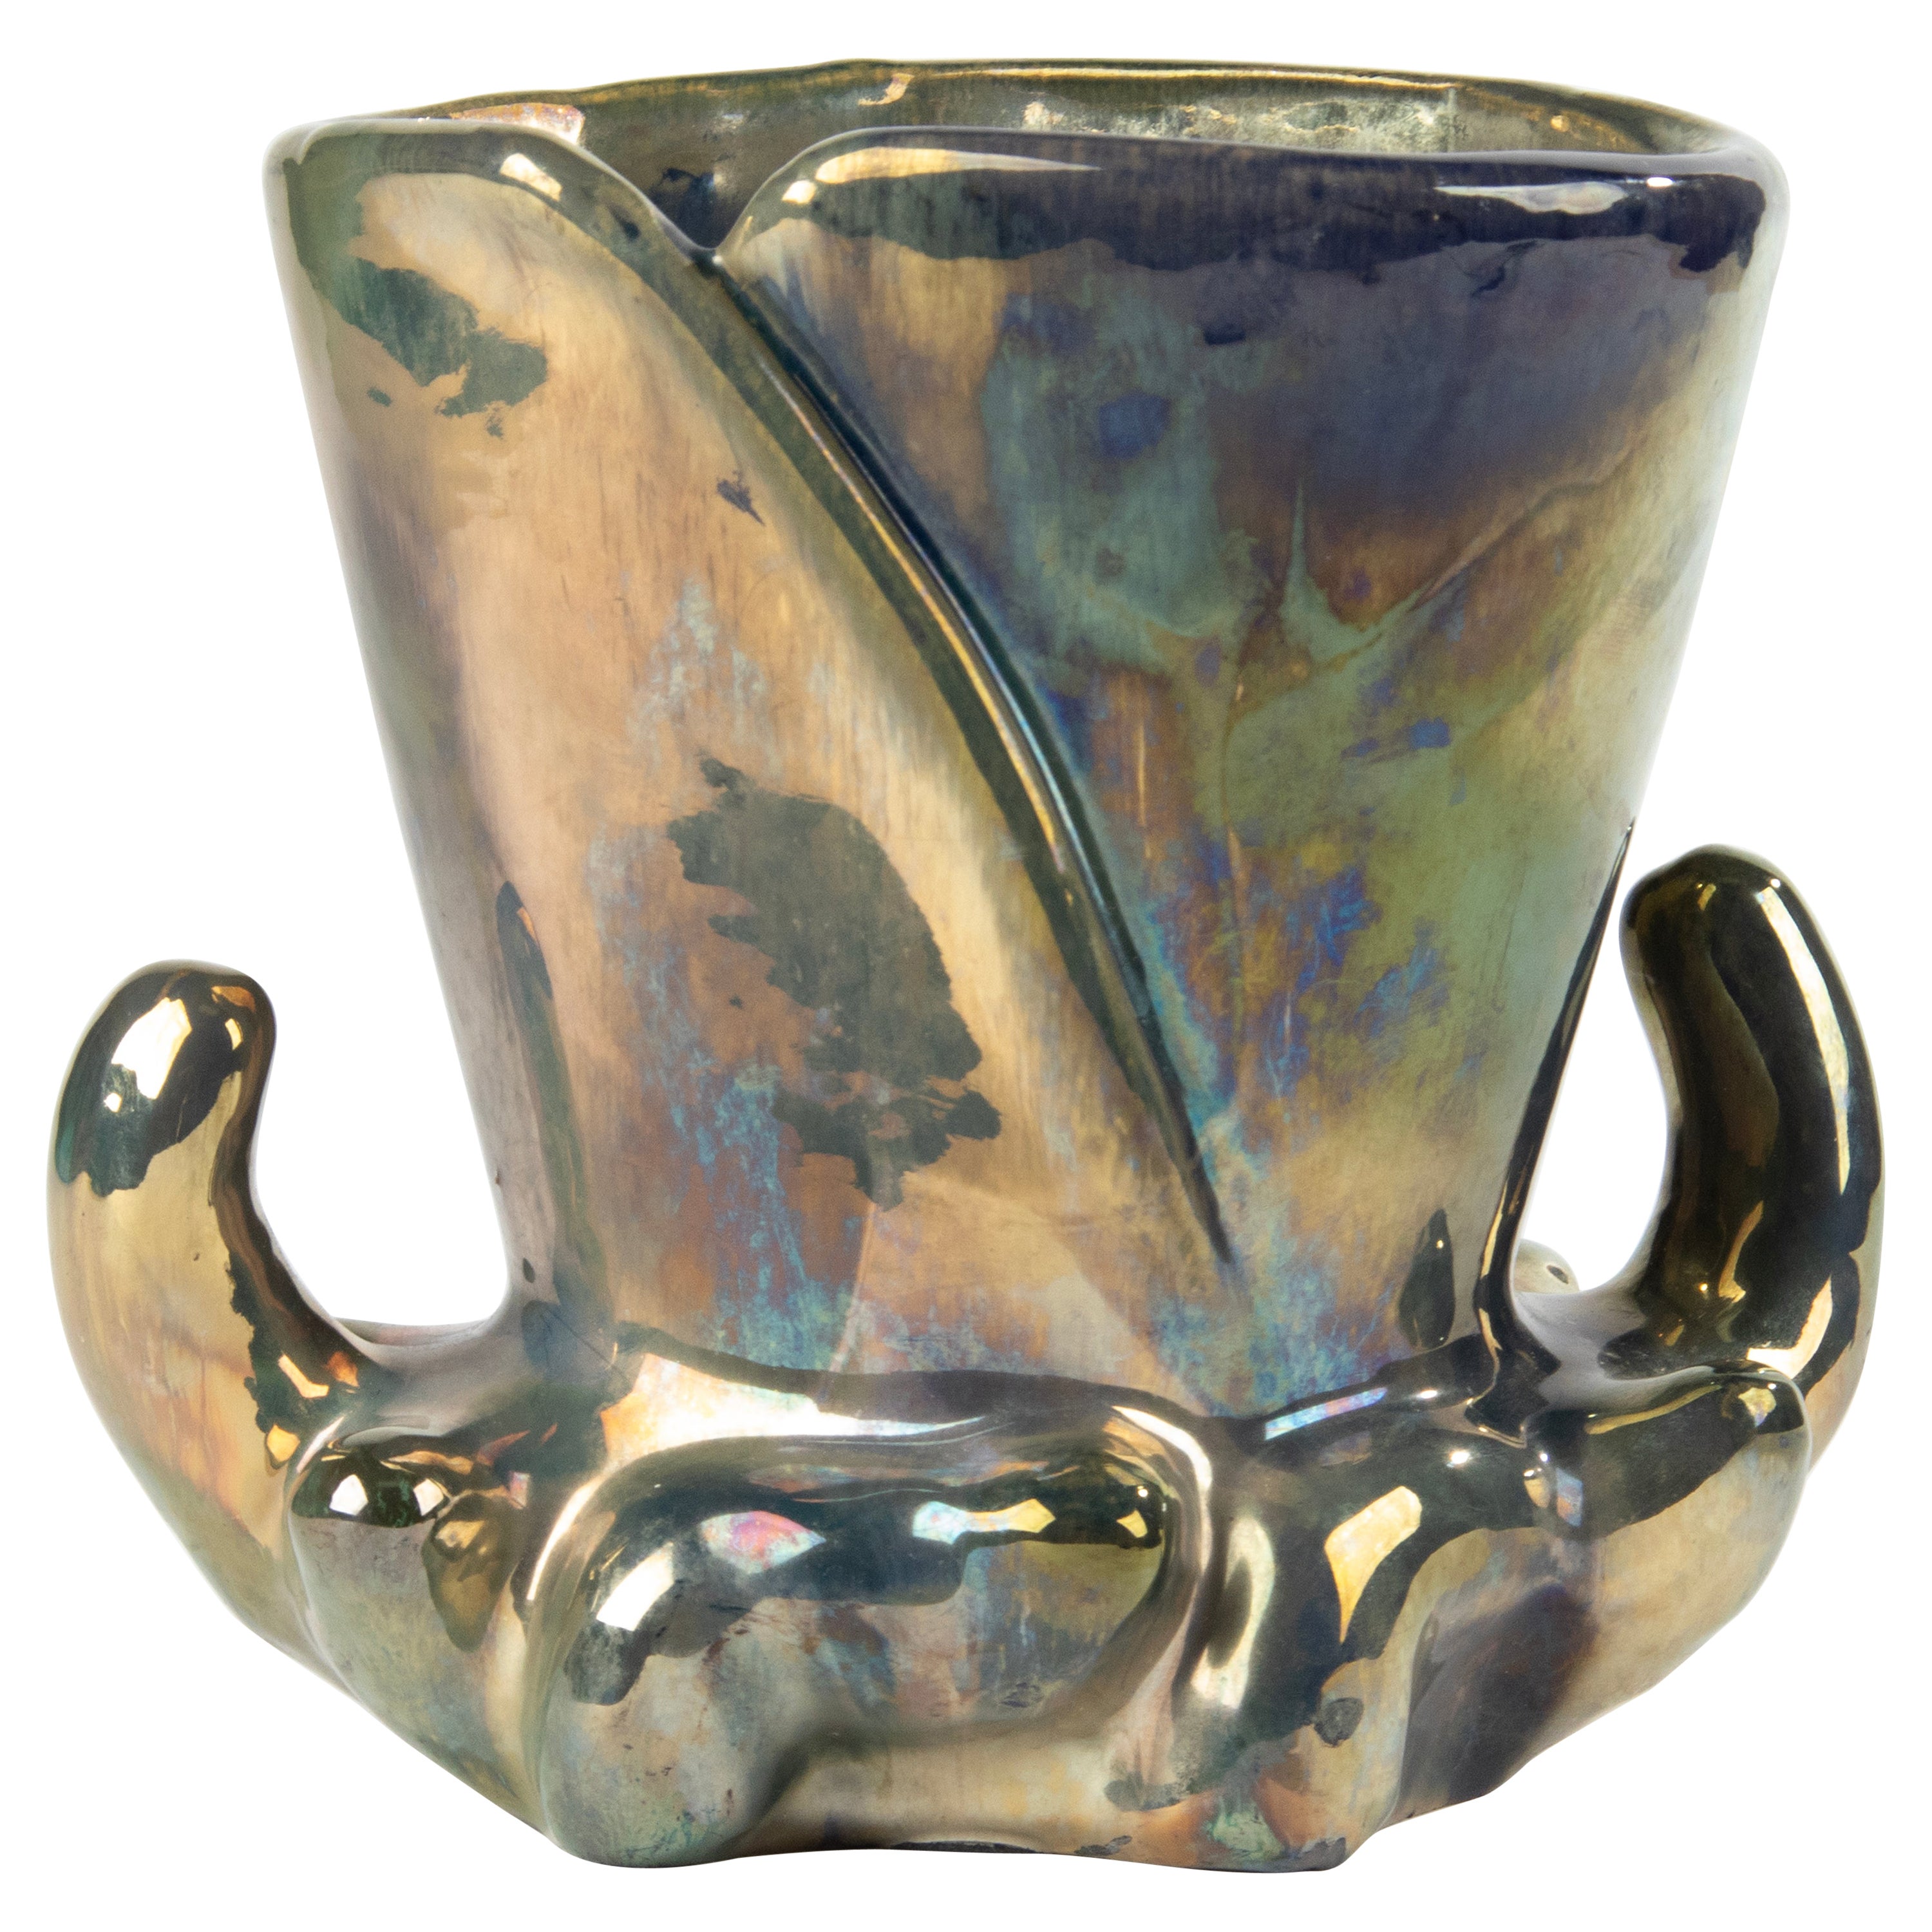 1930s Ceramic Art Deco Vase with Iridescent Glaze - Rambervilliers France For Sale